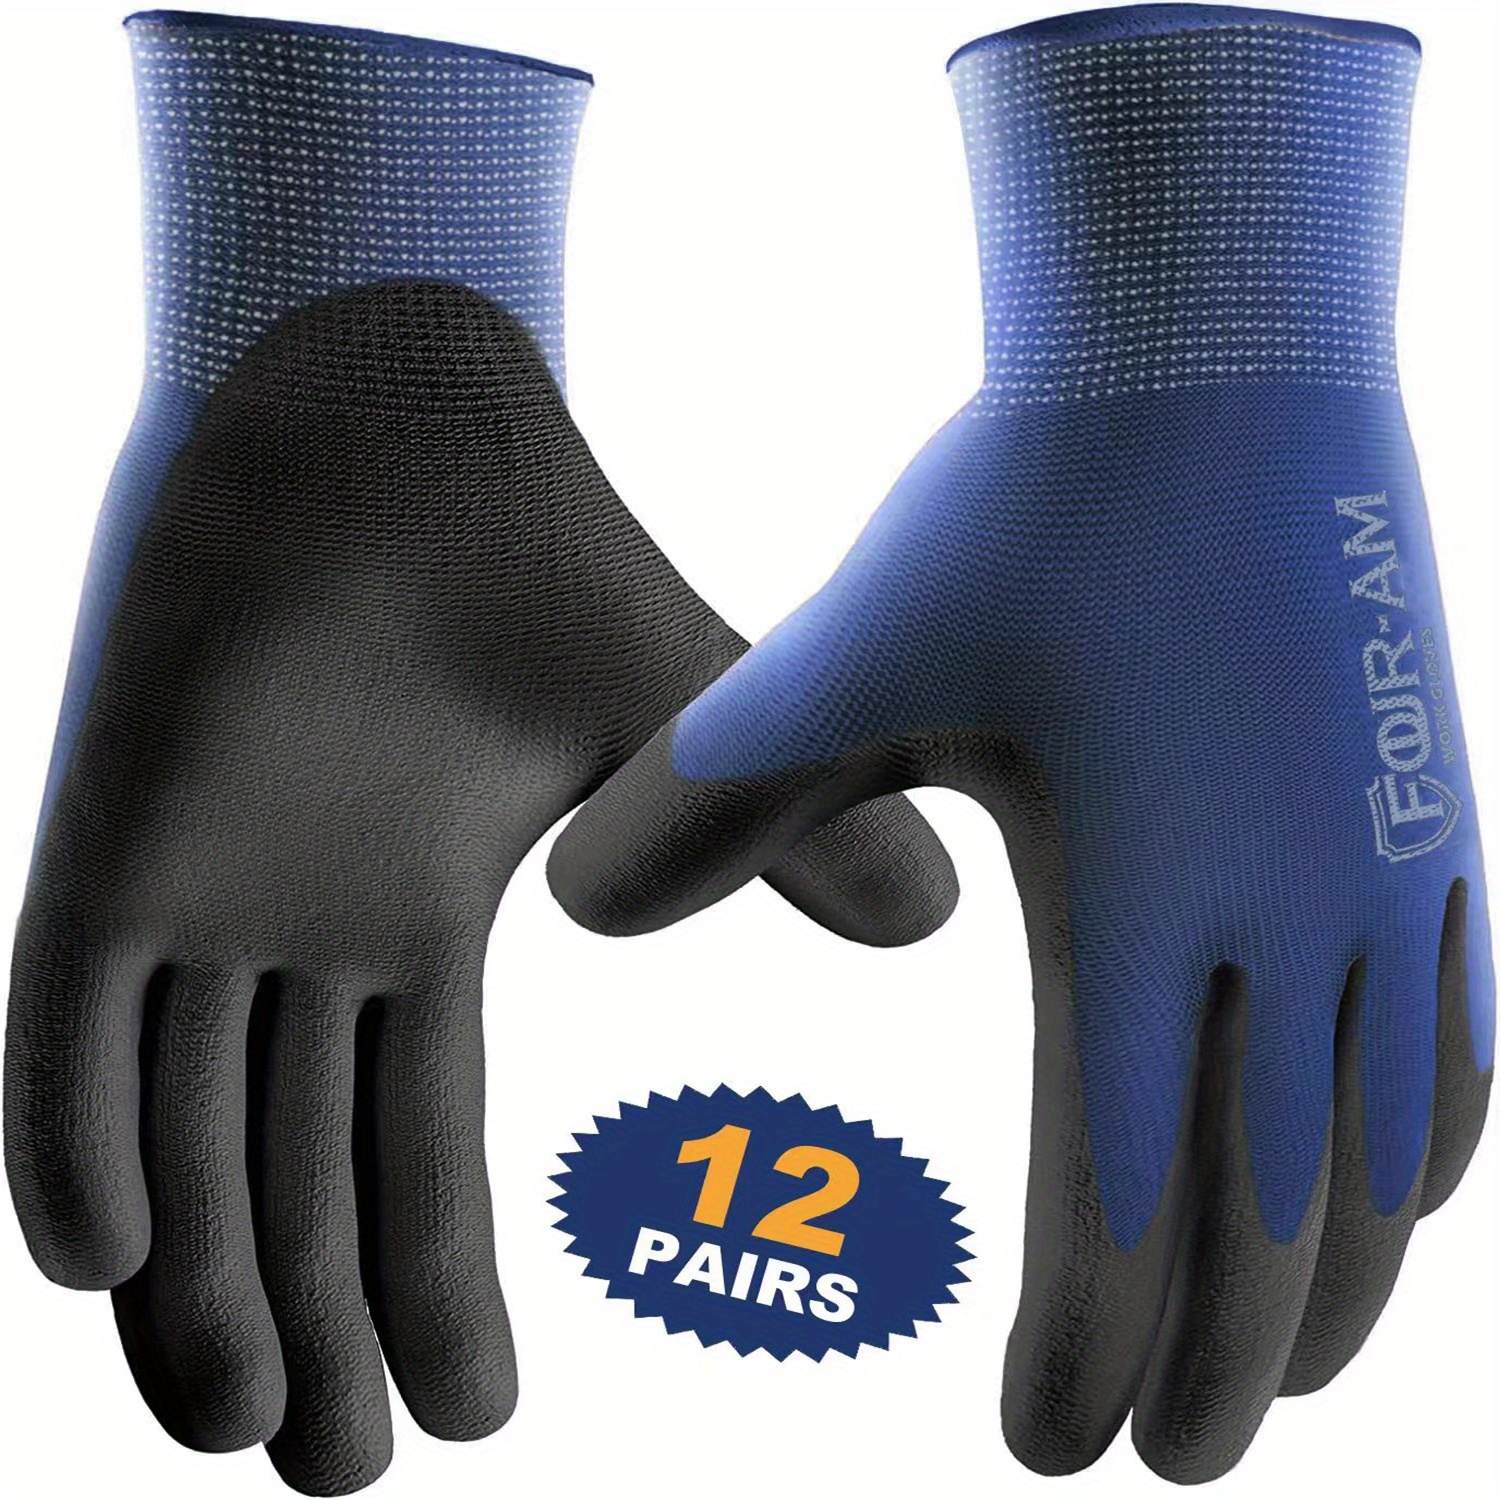 DULFINE Ultra-Thin PU Coated Work Gloves-12 Pairs,Excellent Grip,Nylon  Shell Black Polyurethane Coated Safety Work Gloves, Knit Wrist Cuff,Ideal  for Light Duty Work. (Extra Large) X-Large Black 